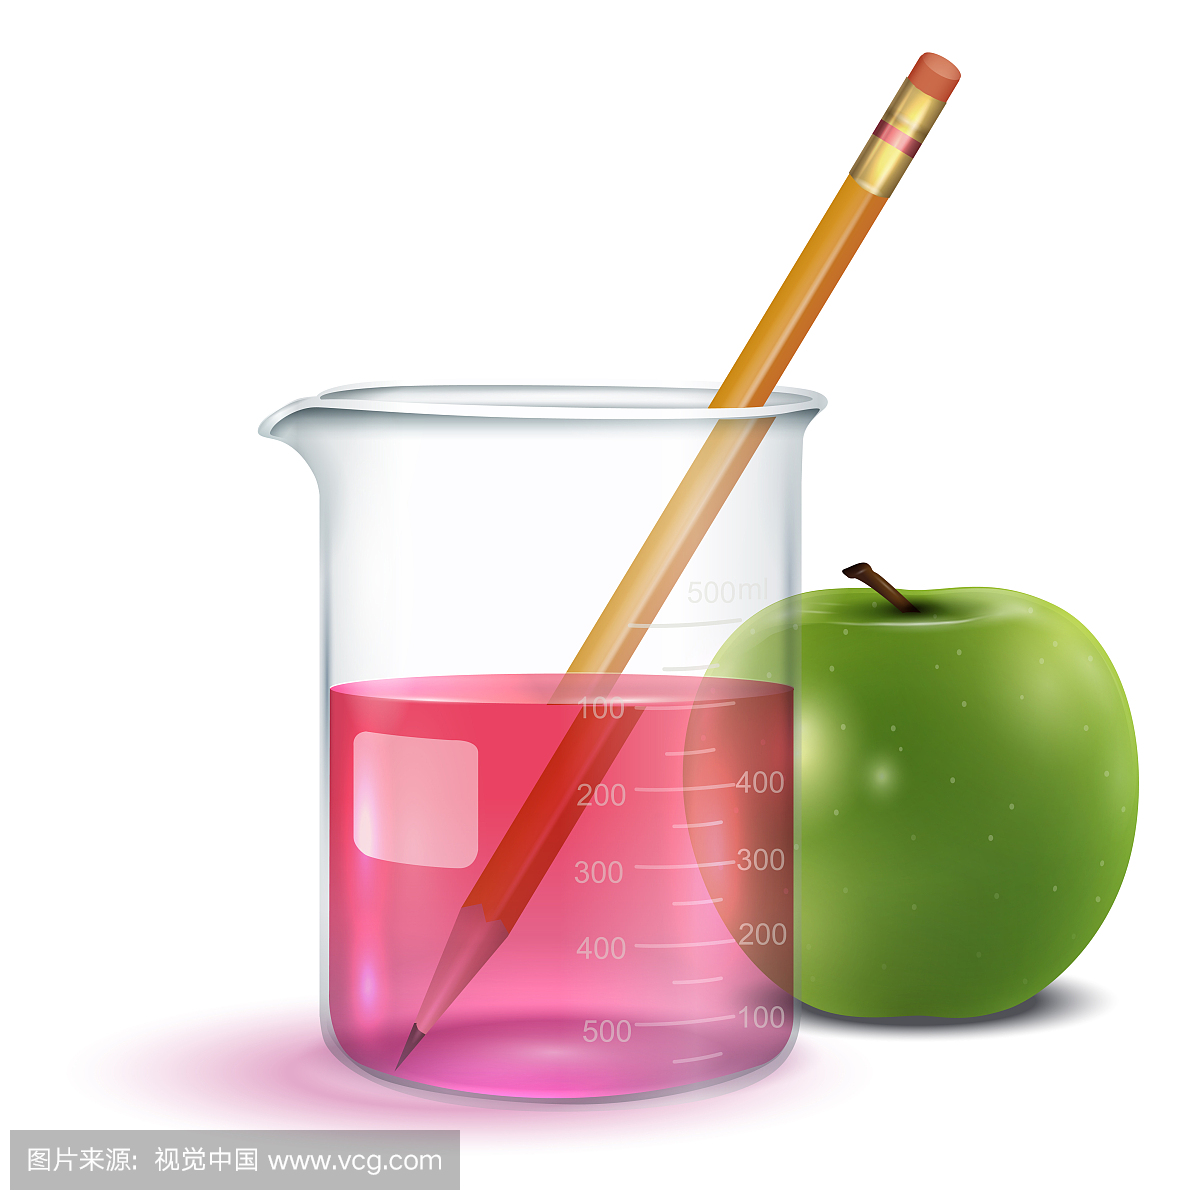 Chemical container with an apple